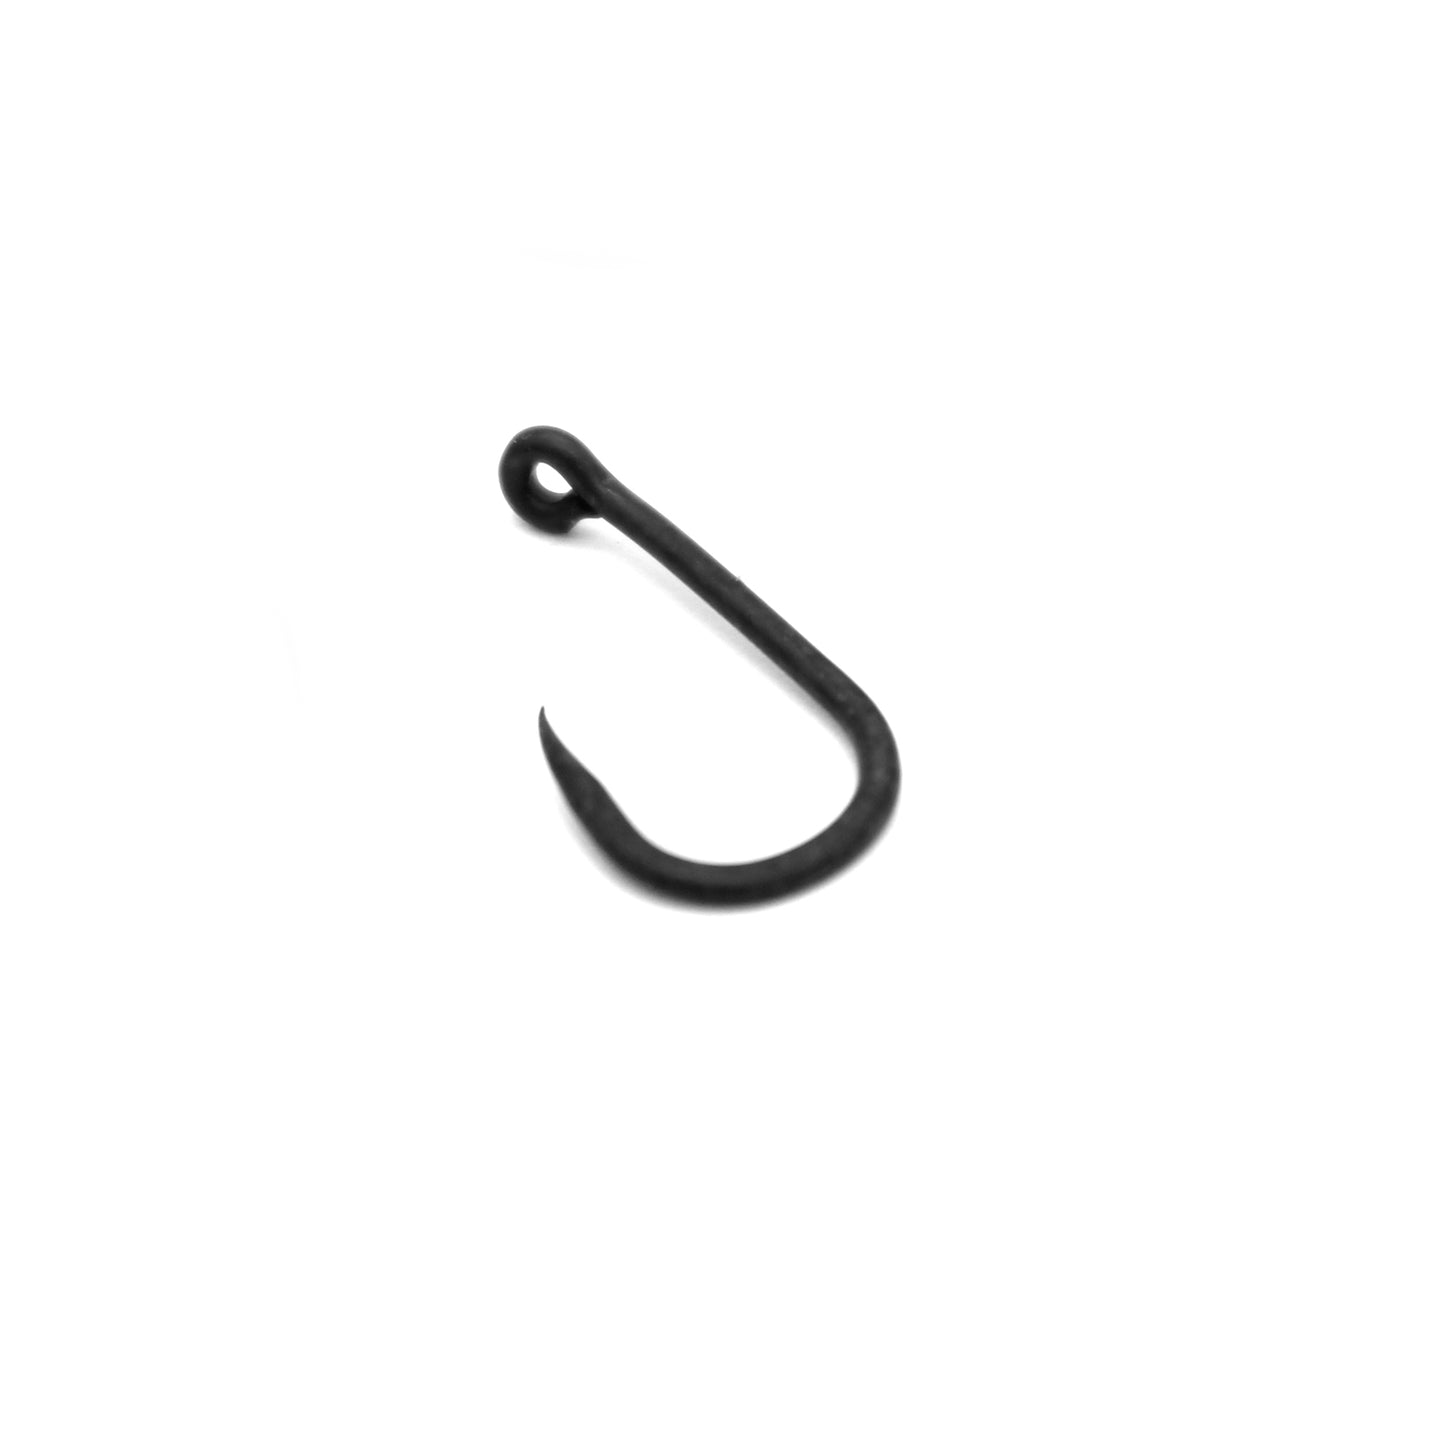 Deception Angling TWG Barbless Fishing Hook